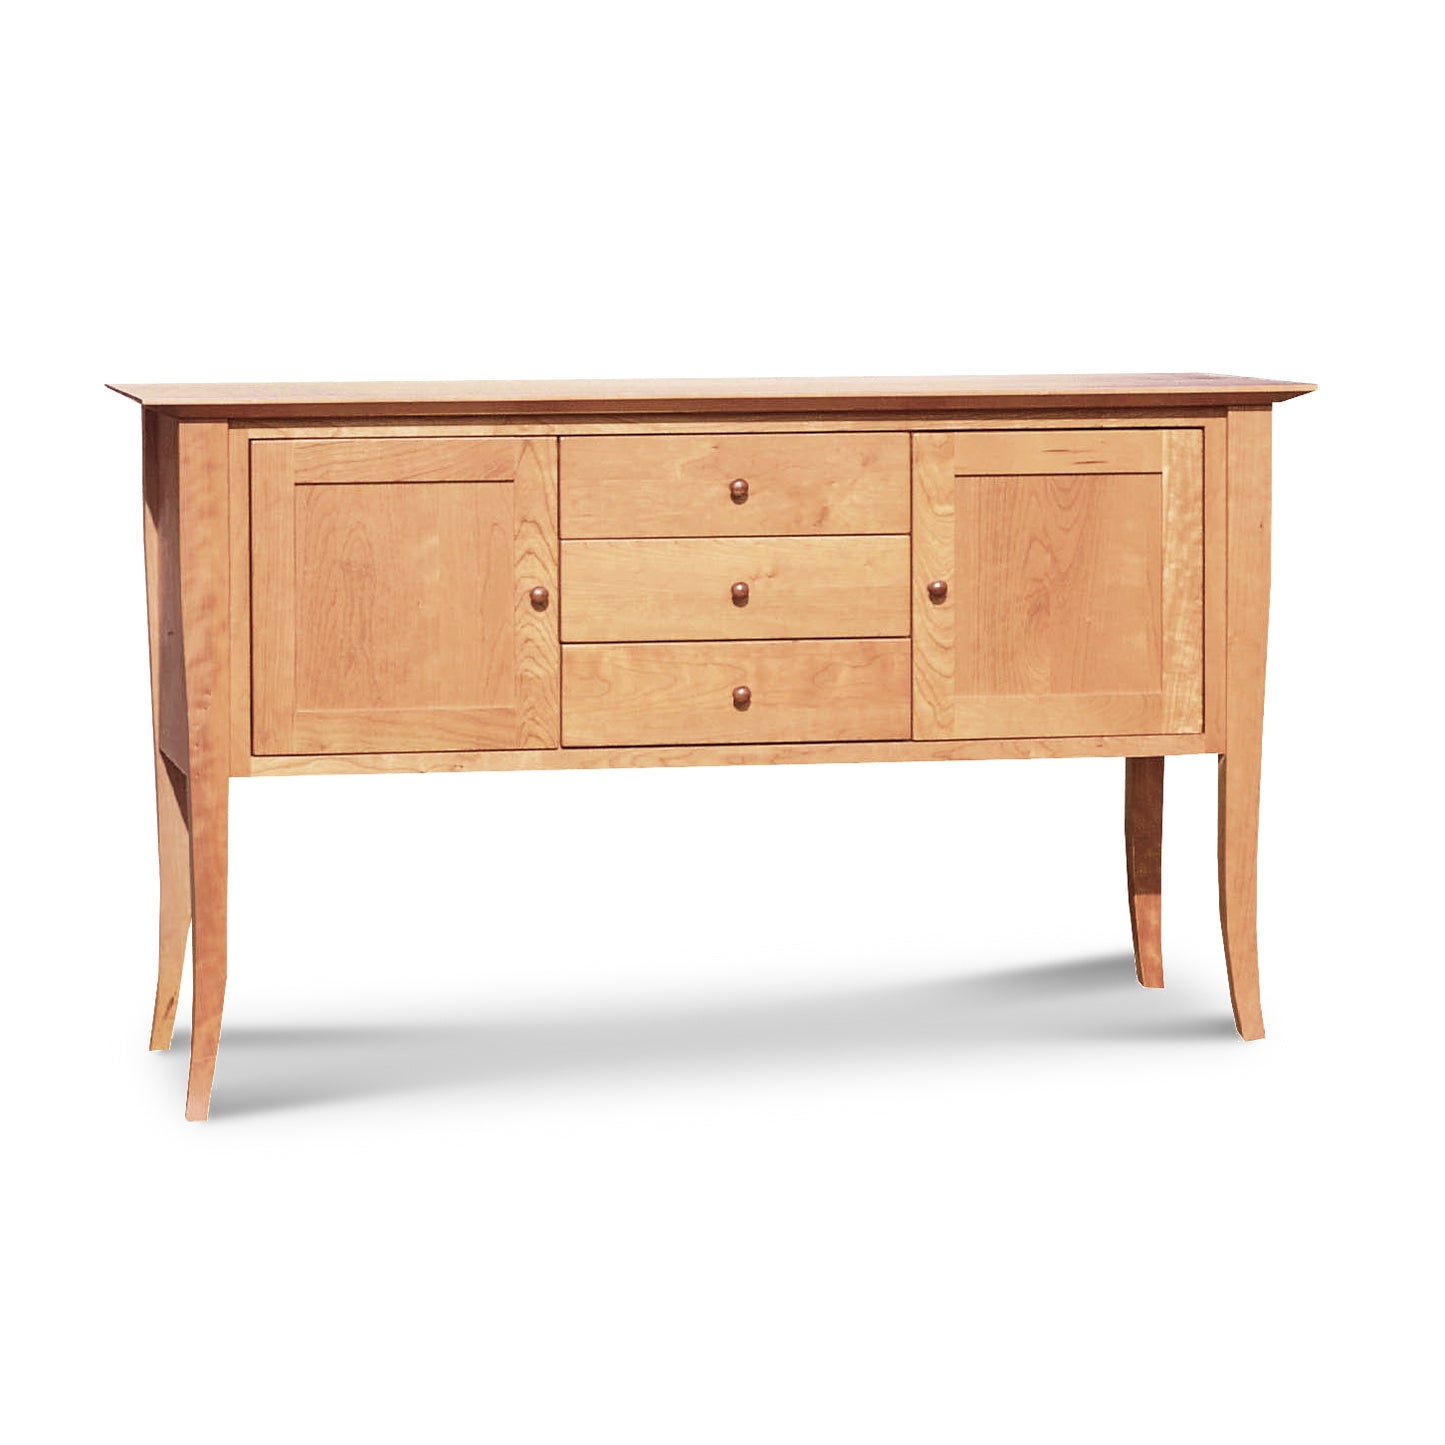 Handcrafted by Lyndon Furniture in Vermont, the Classic Shaker Flare Leg Small Buffet features drawers and doors, making it a perfect addition to any dining room or kitchen.